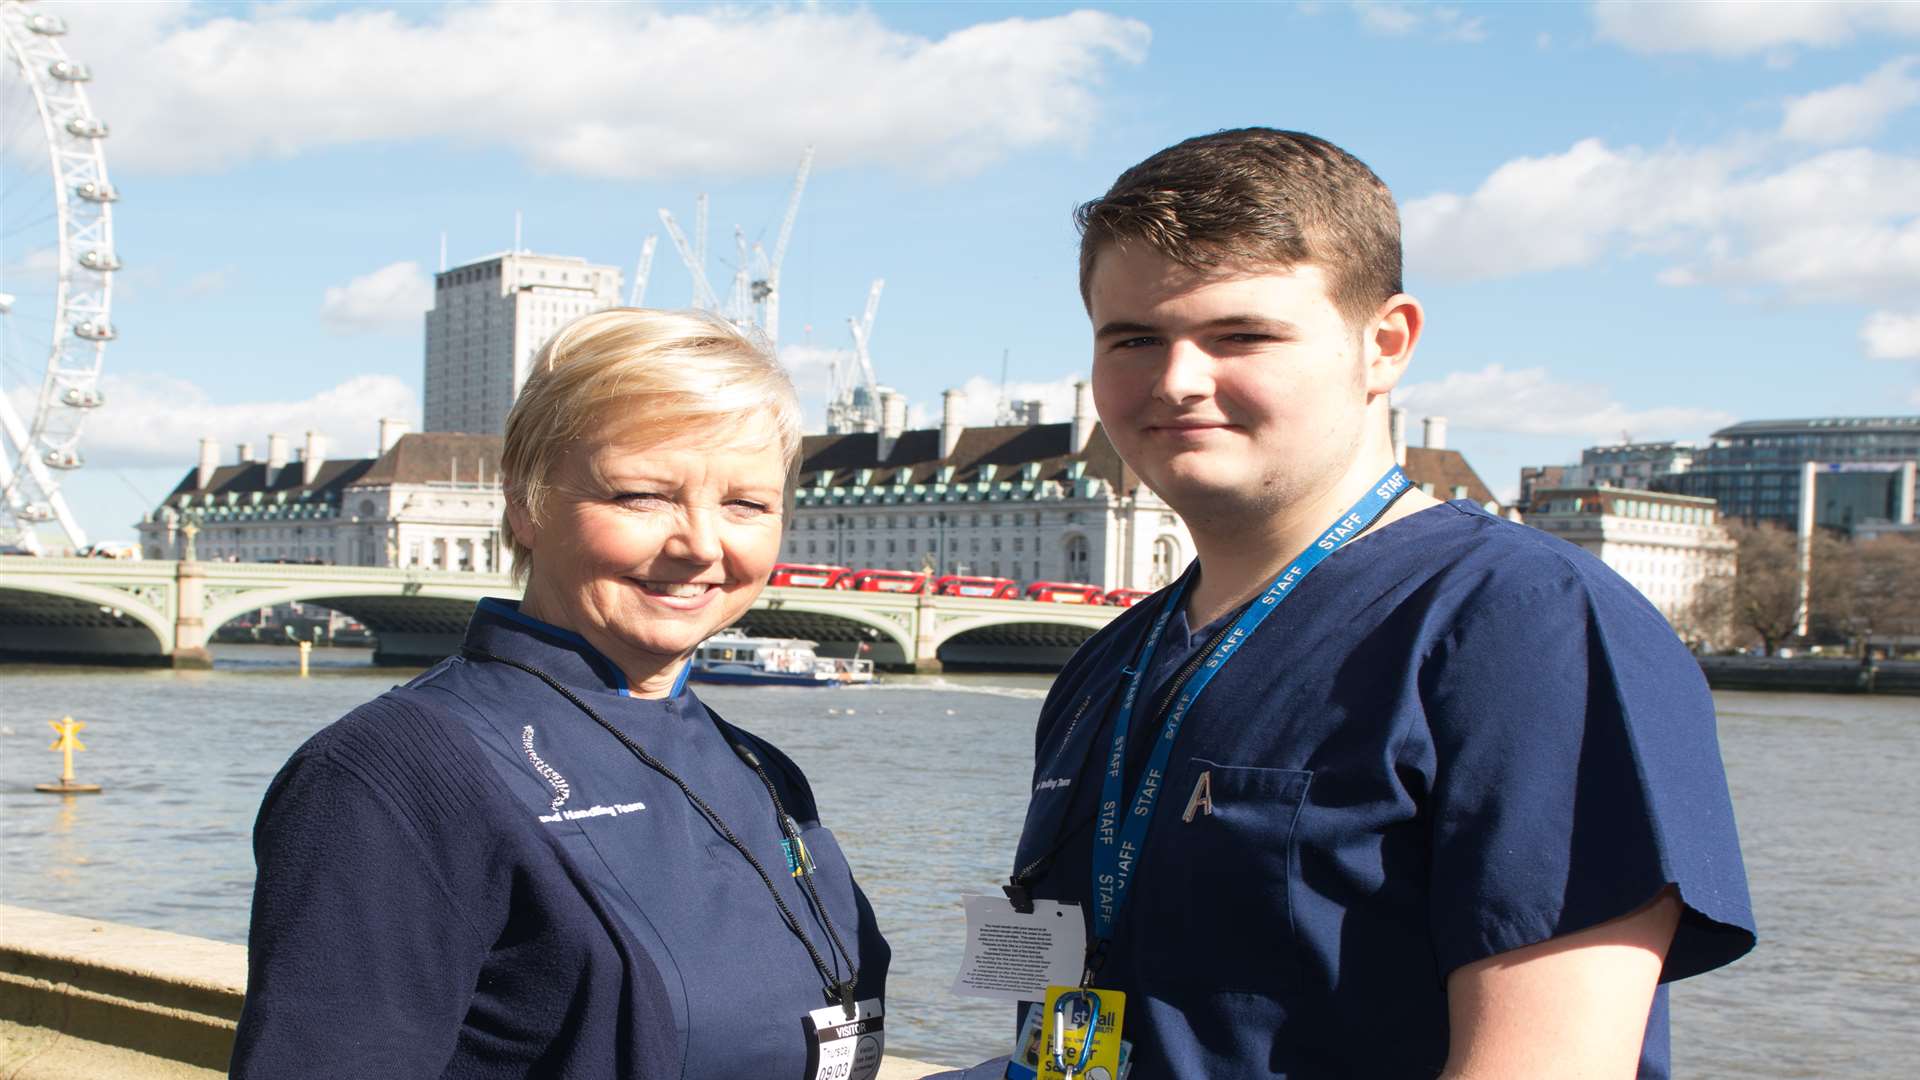 Buckland Hospital apprentice Nial Crutchfield with manager Sharon Rinsland. He has been shortlisted for an award.